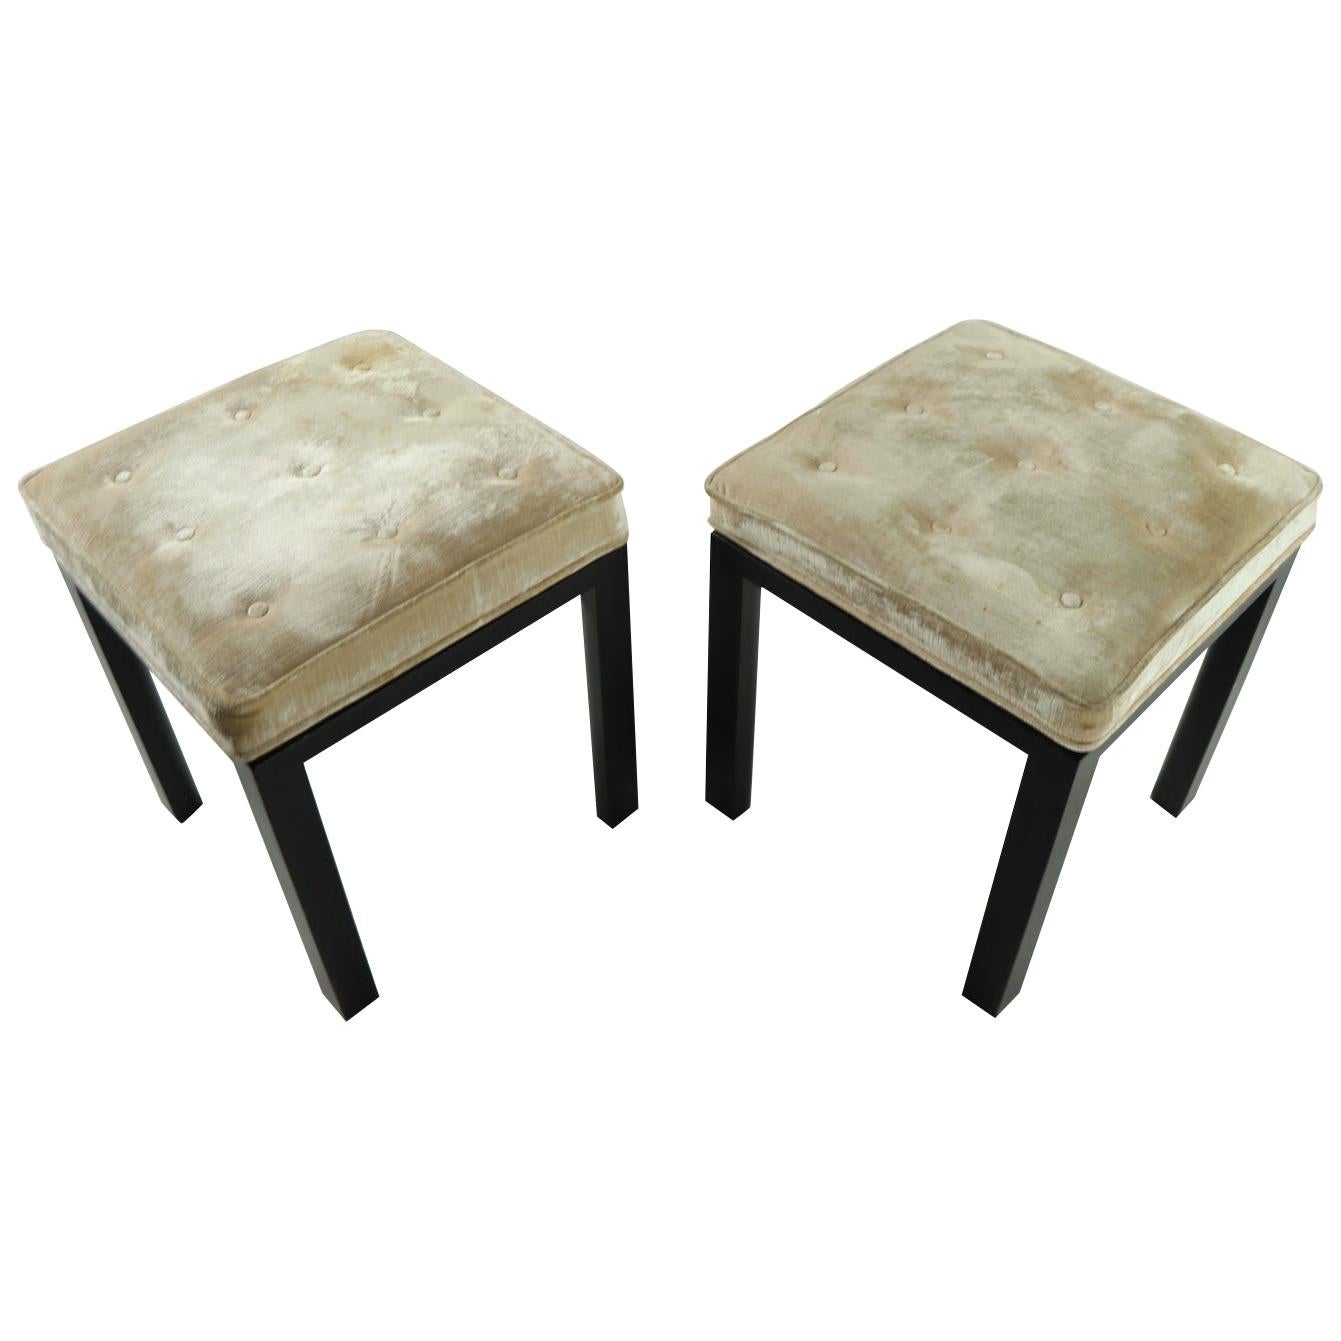 Pair of Ottoman Stools  by Probber